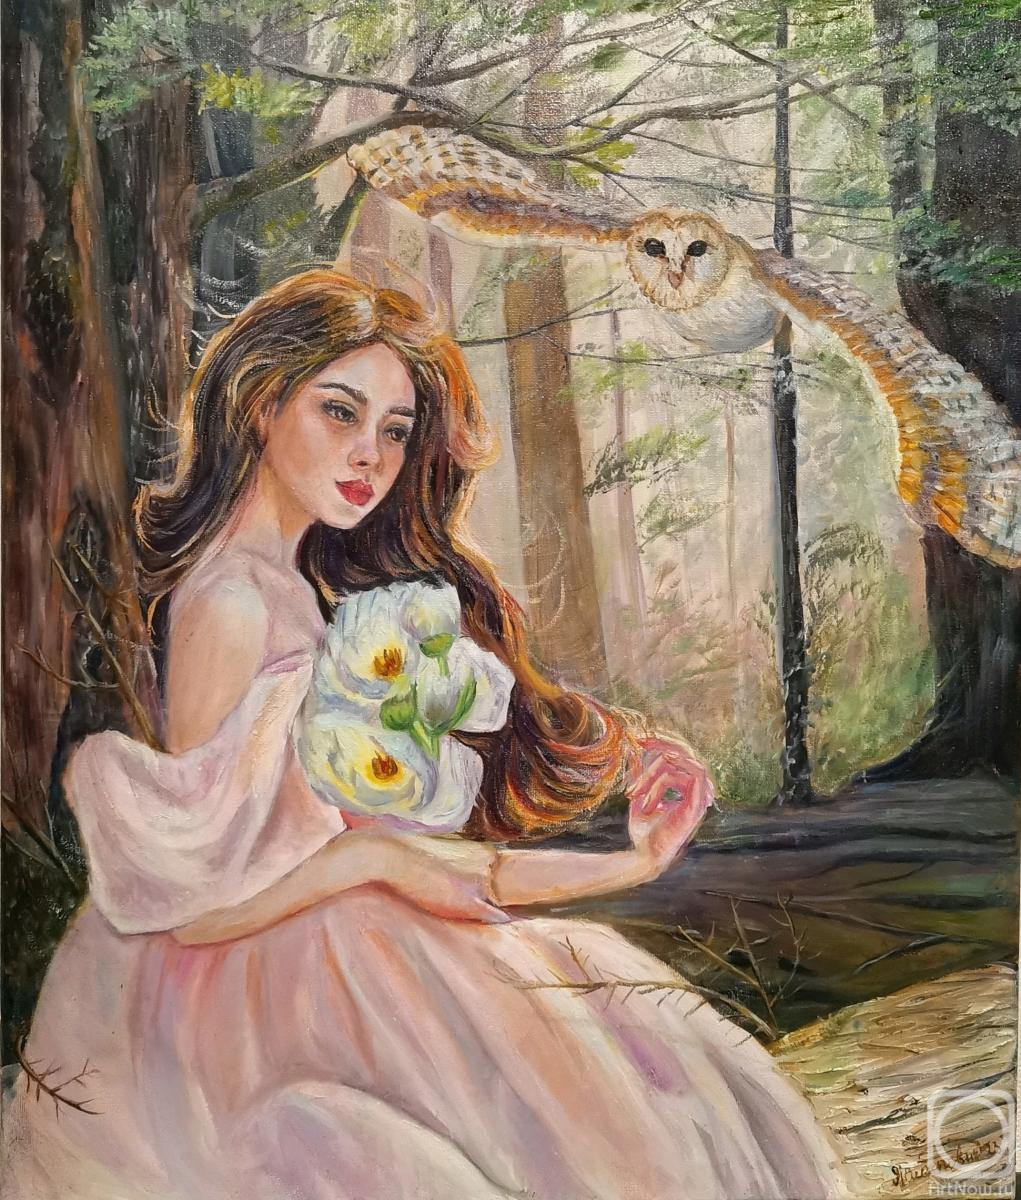 Olehnovich Polina. The Meeting with Forest King